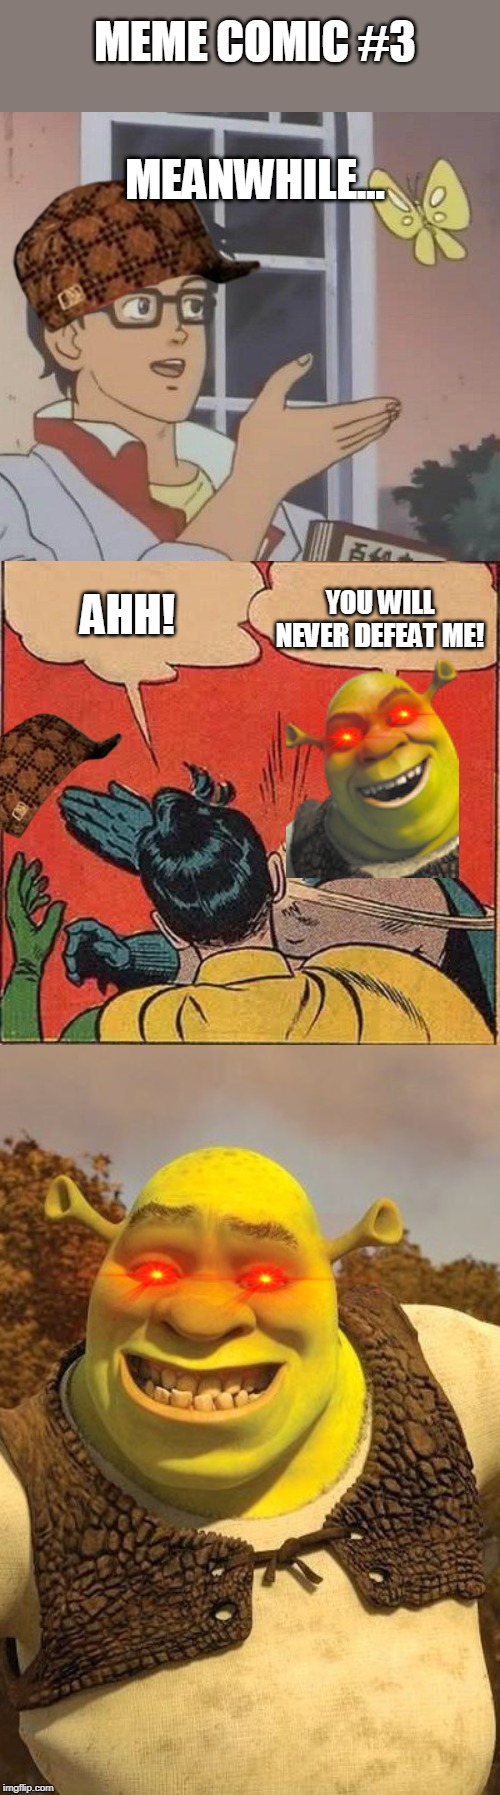 MEME COMIC #3; MEANWHILE... AHH! YOU WILL NEVER DEFEAT ME! | image tagged in memes,batman slapping robin,smiling shrek,is this a pigeon | made w/ Imgflip meme maker